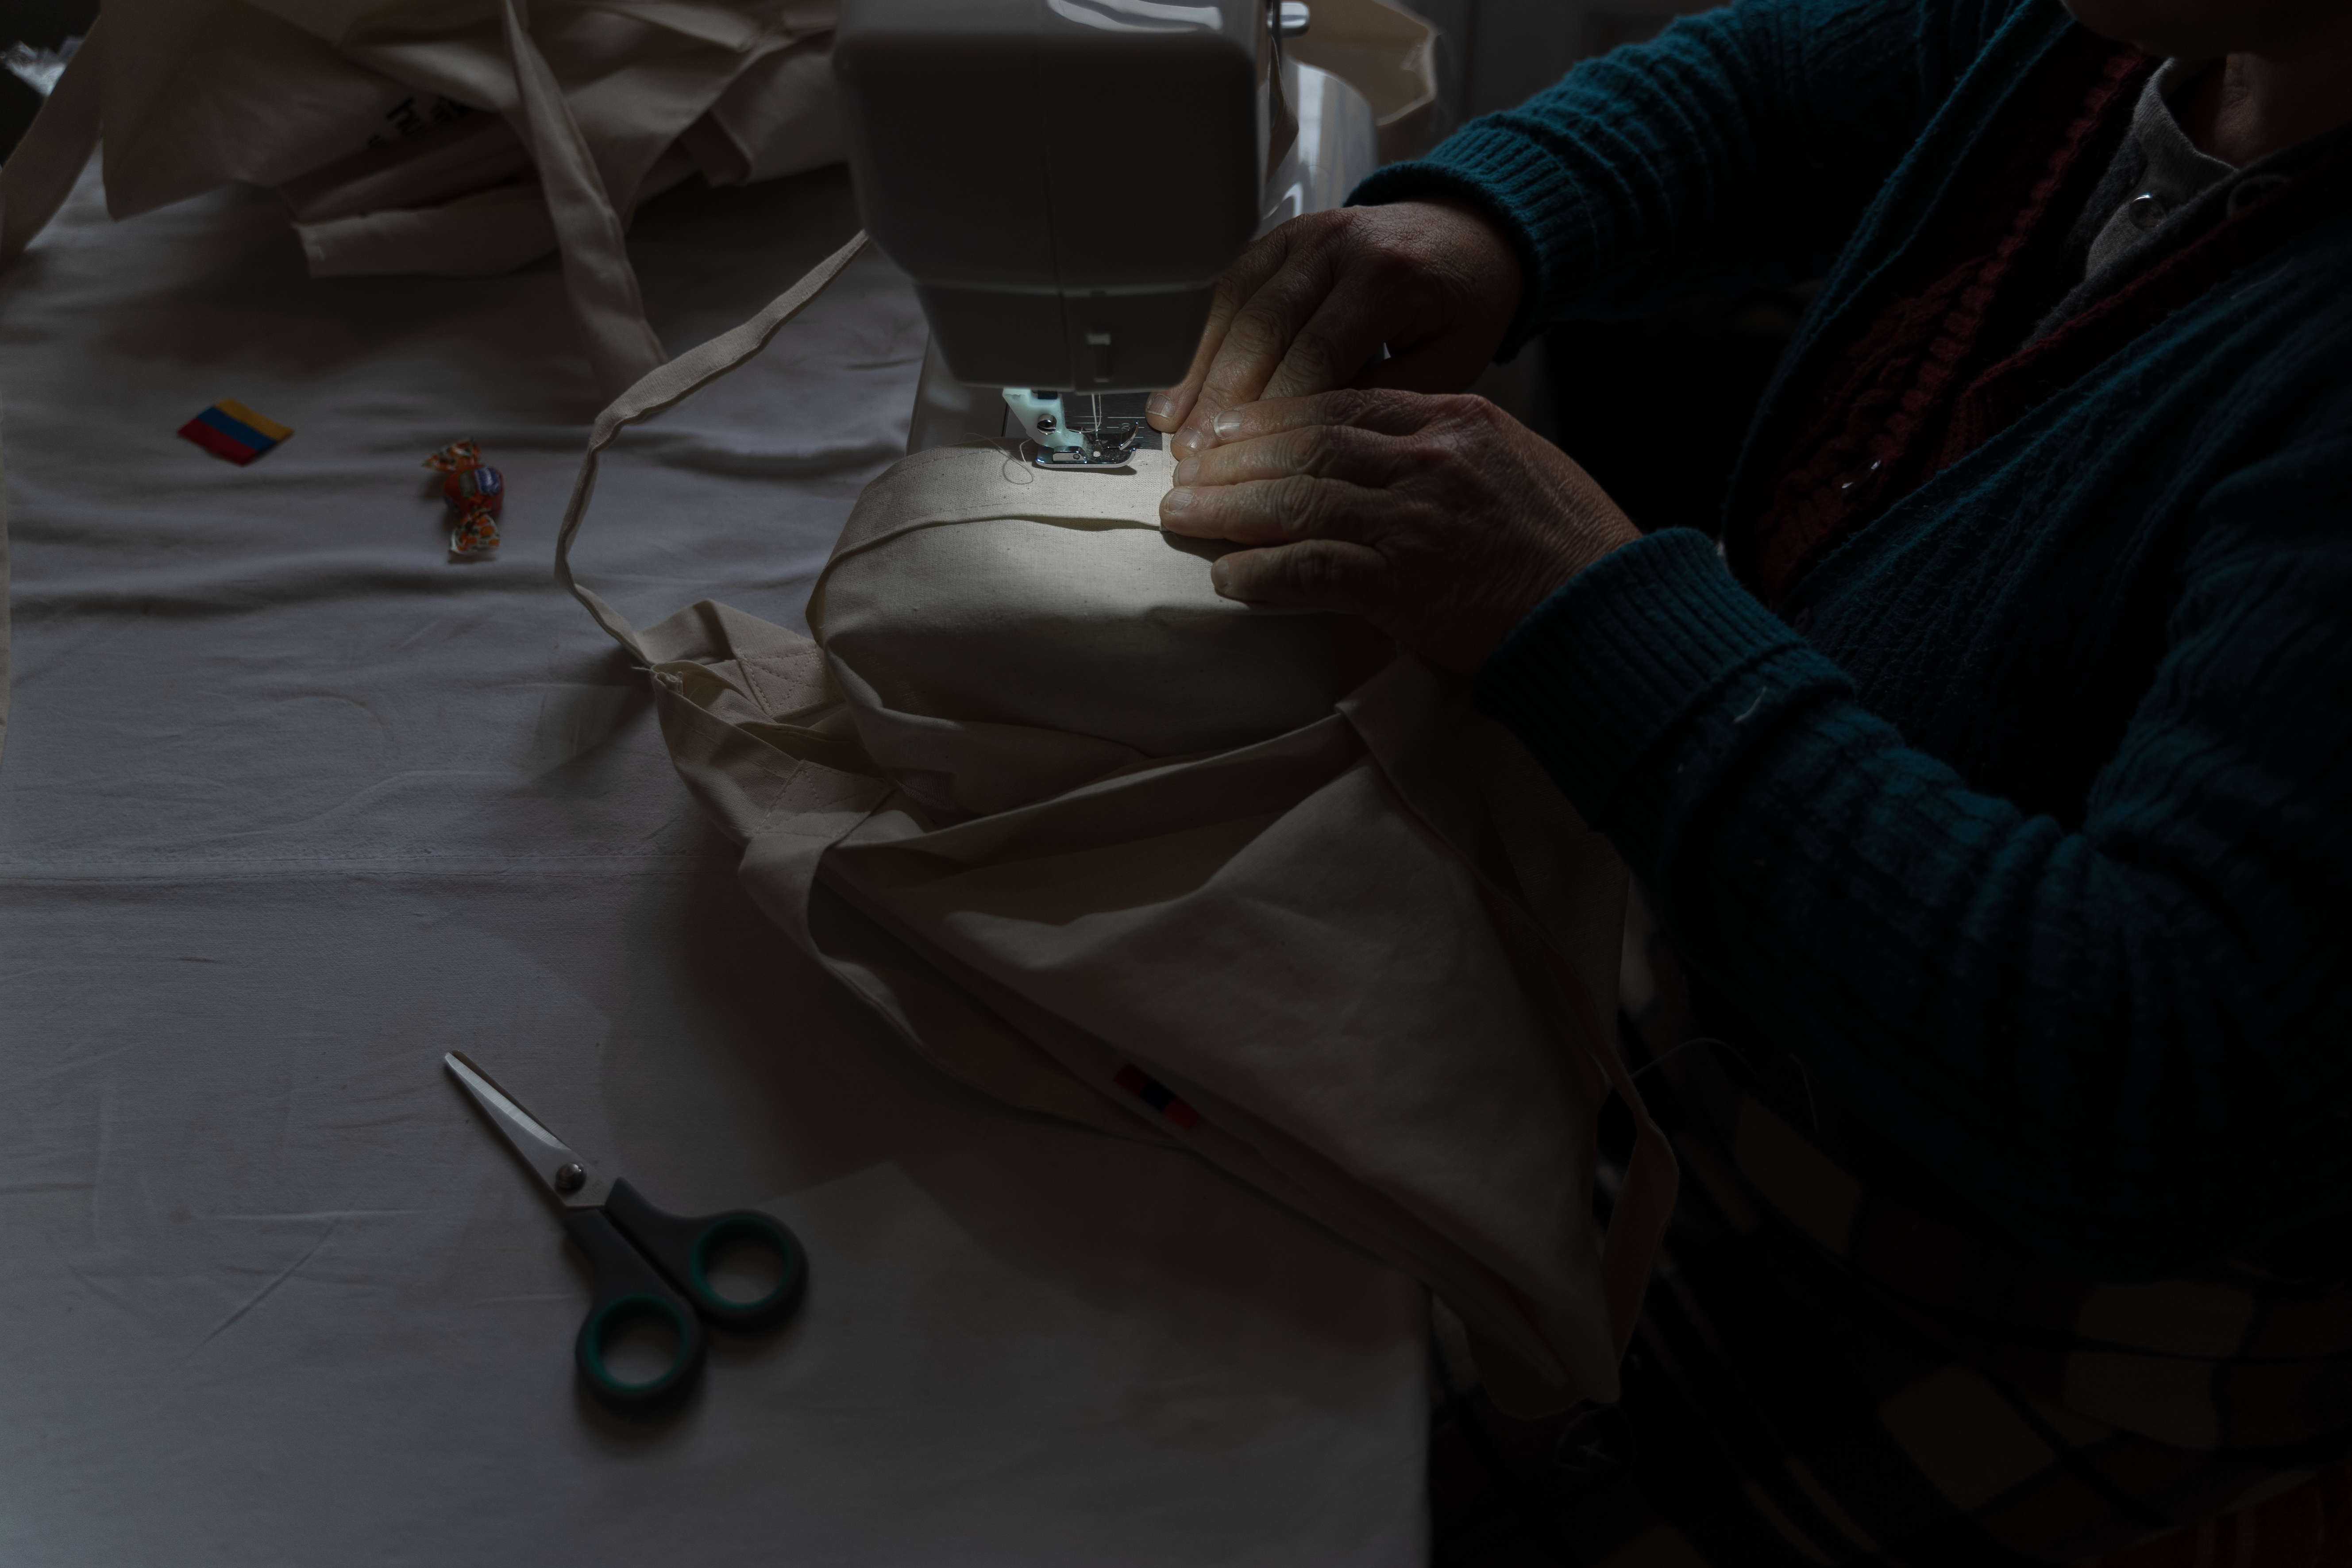 Volunteers trained the refugees who wanted to participate but didn’t know how to sew.